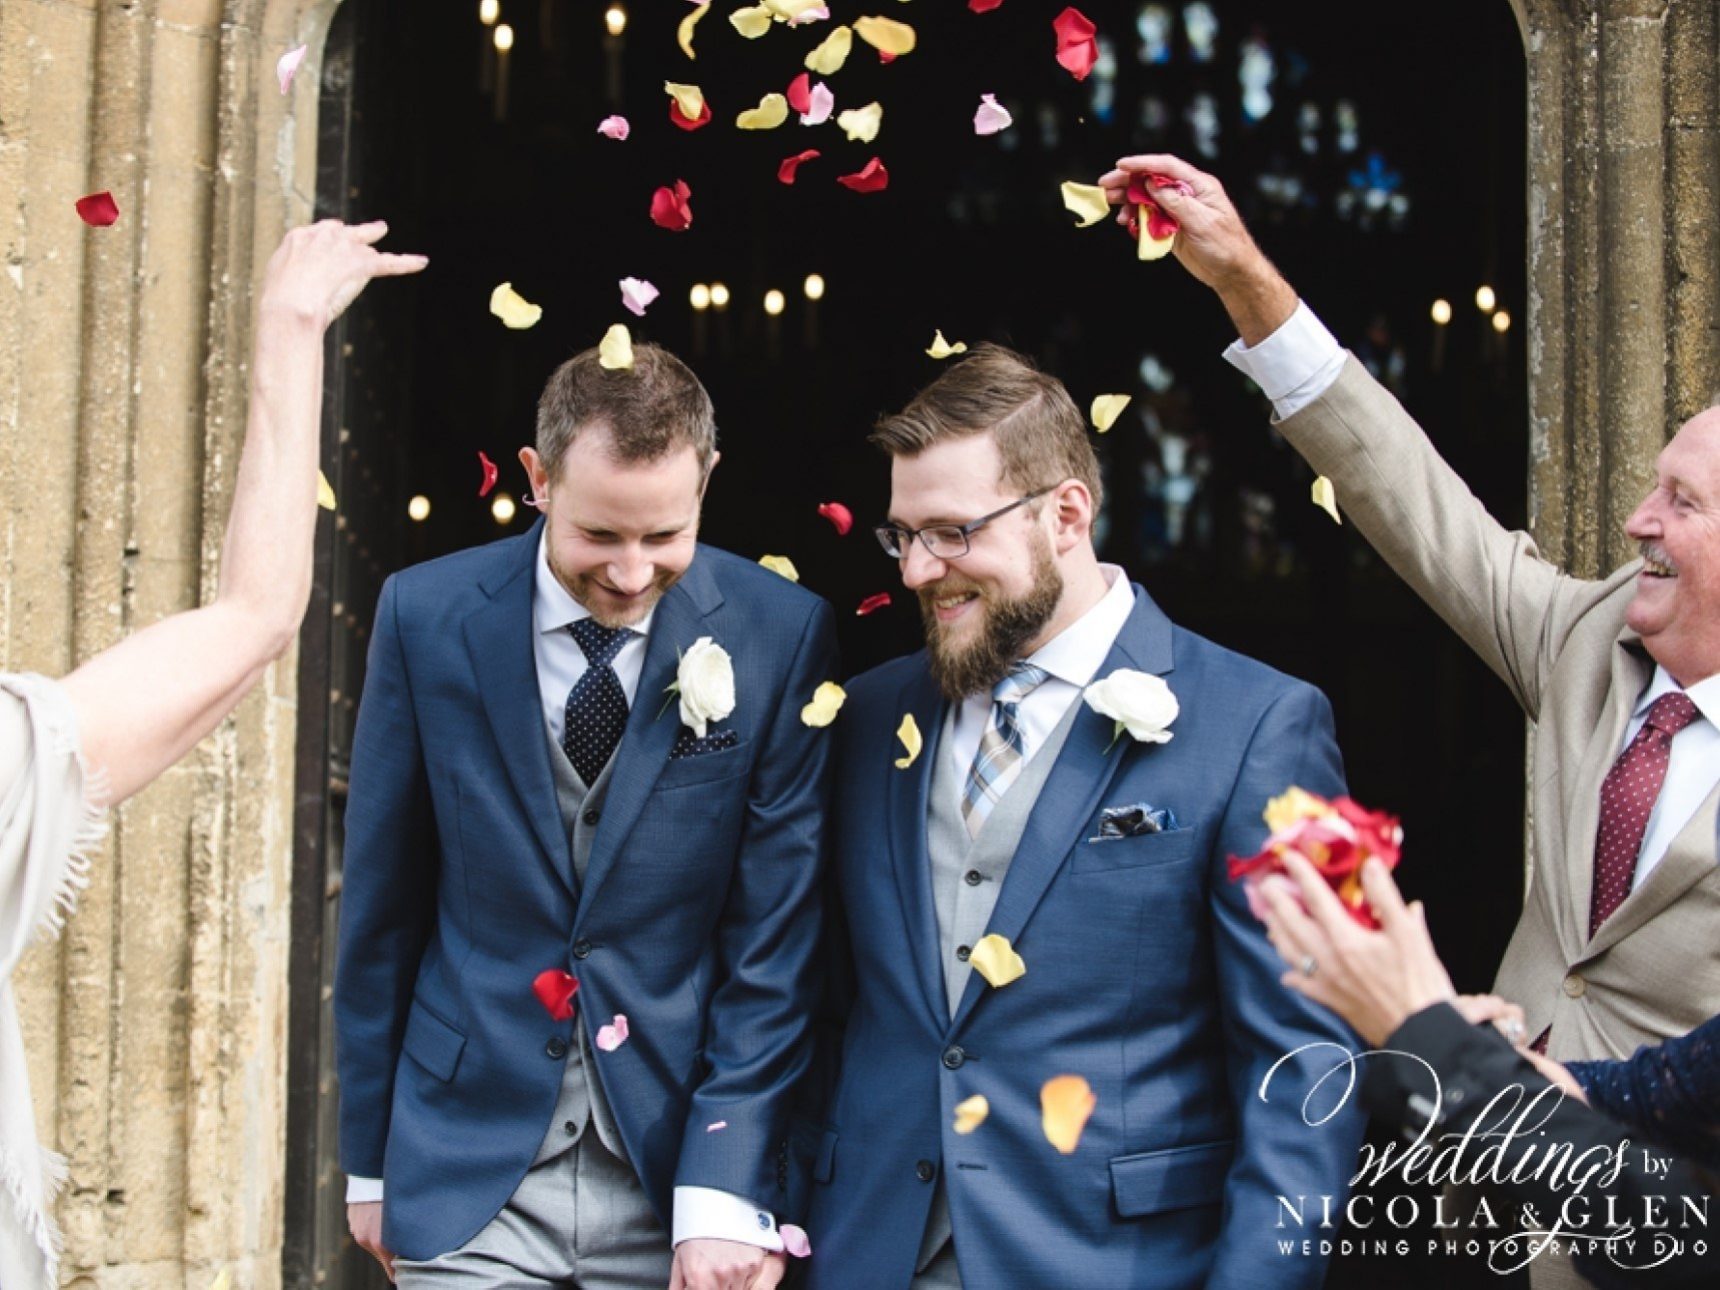 Groomsmen with confetti outside church door